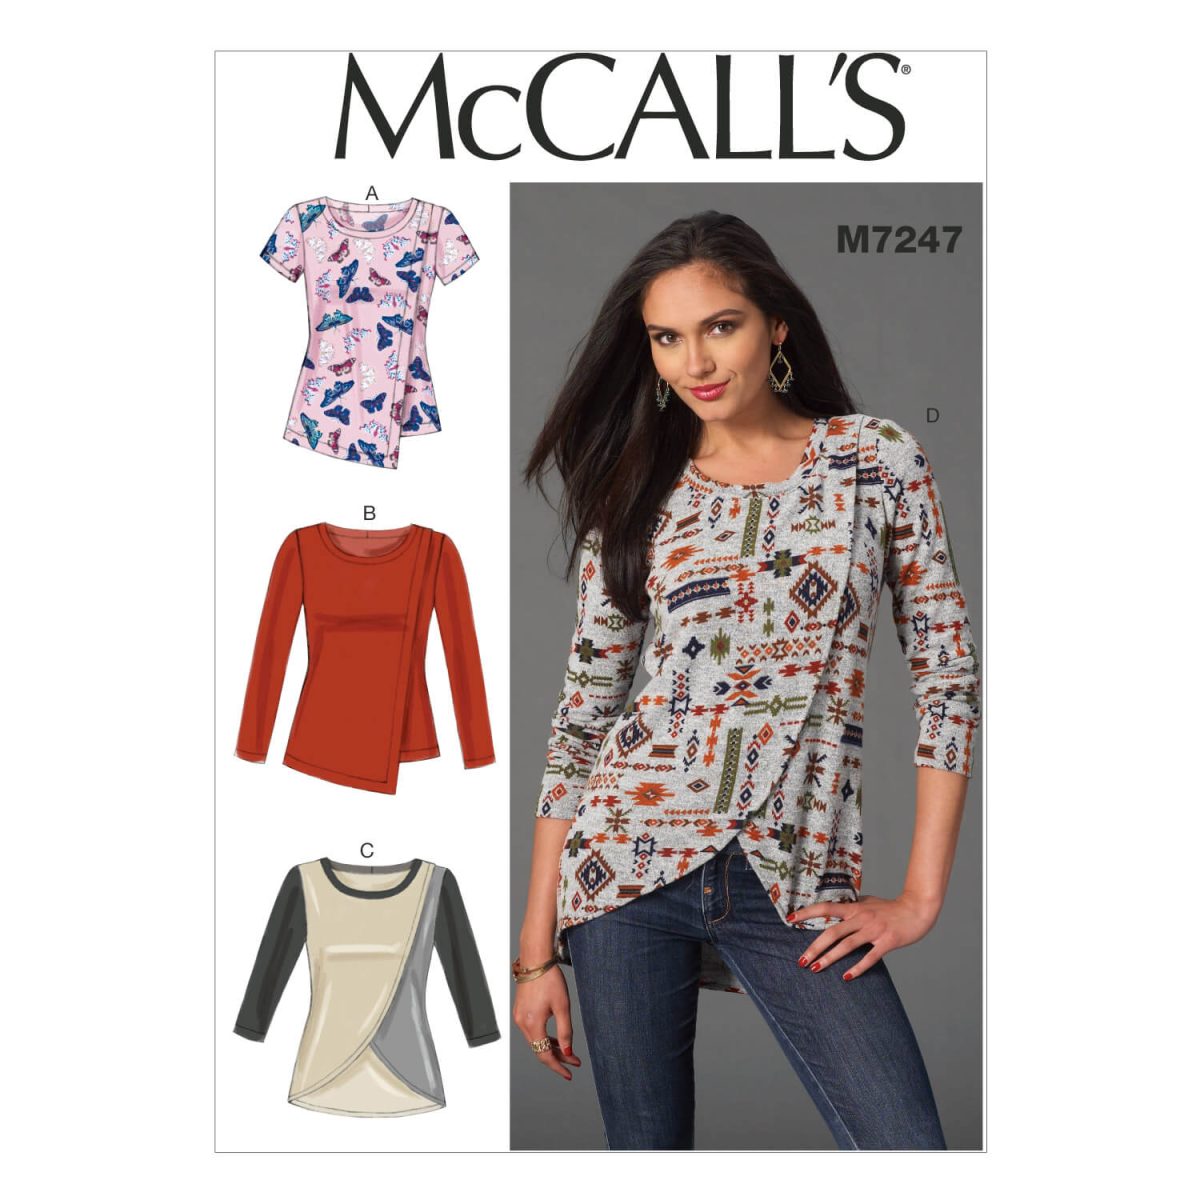 McCall’s Sewing Pattern M7247 Misses’ Tops - Sewdirect